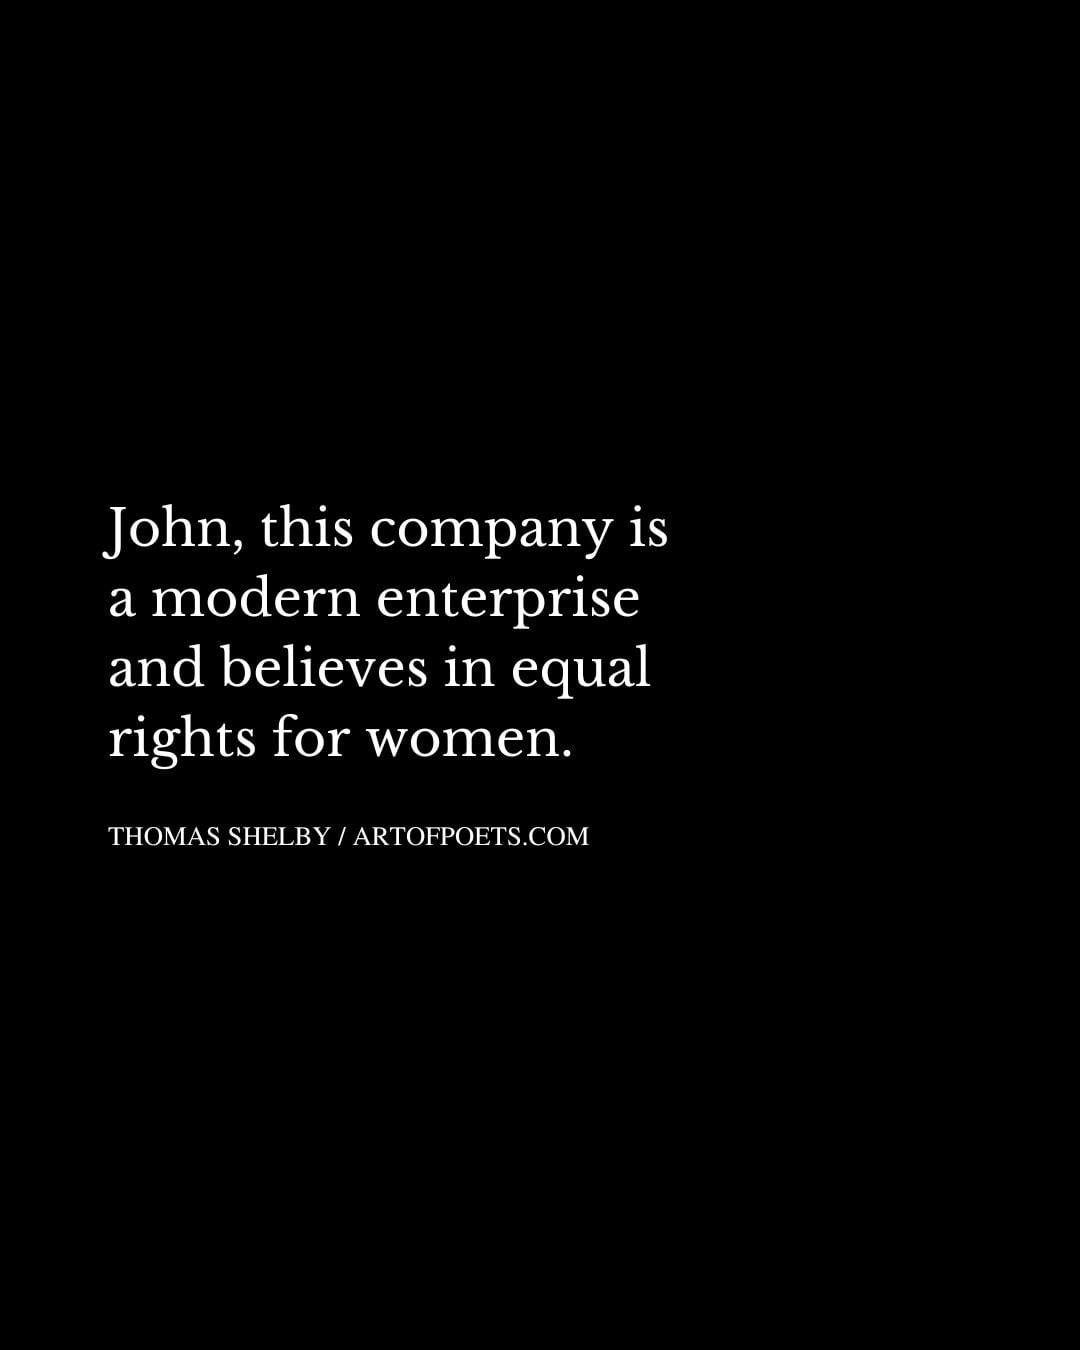 John this company is a modern enterprise and believes in equal rights for women